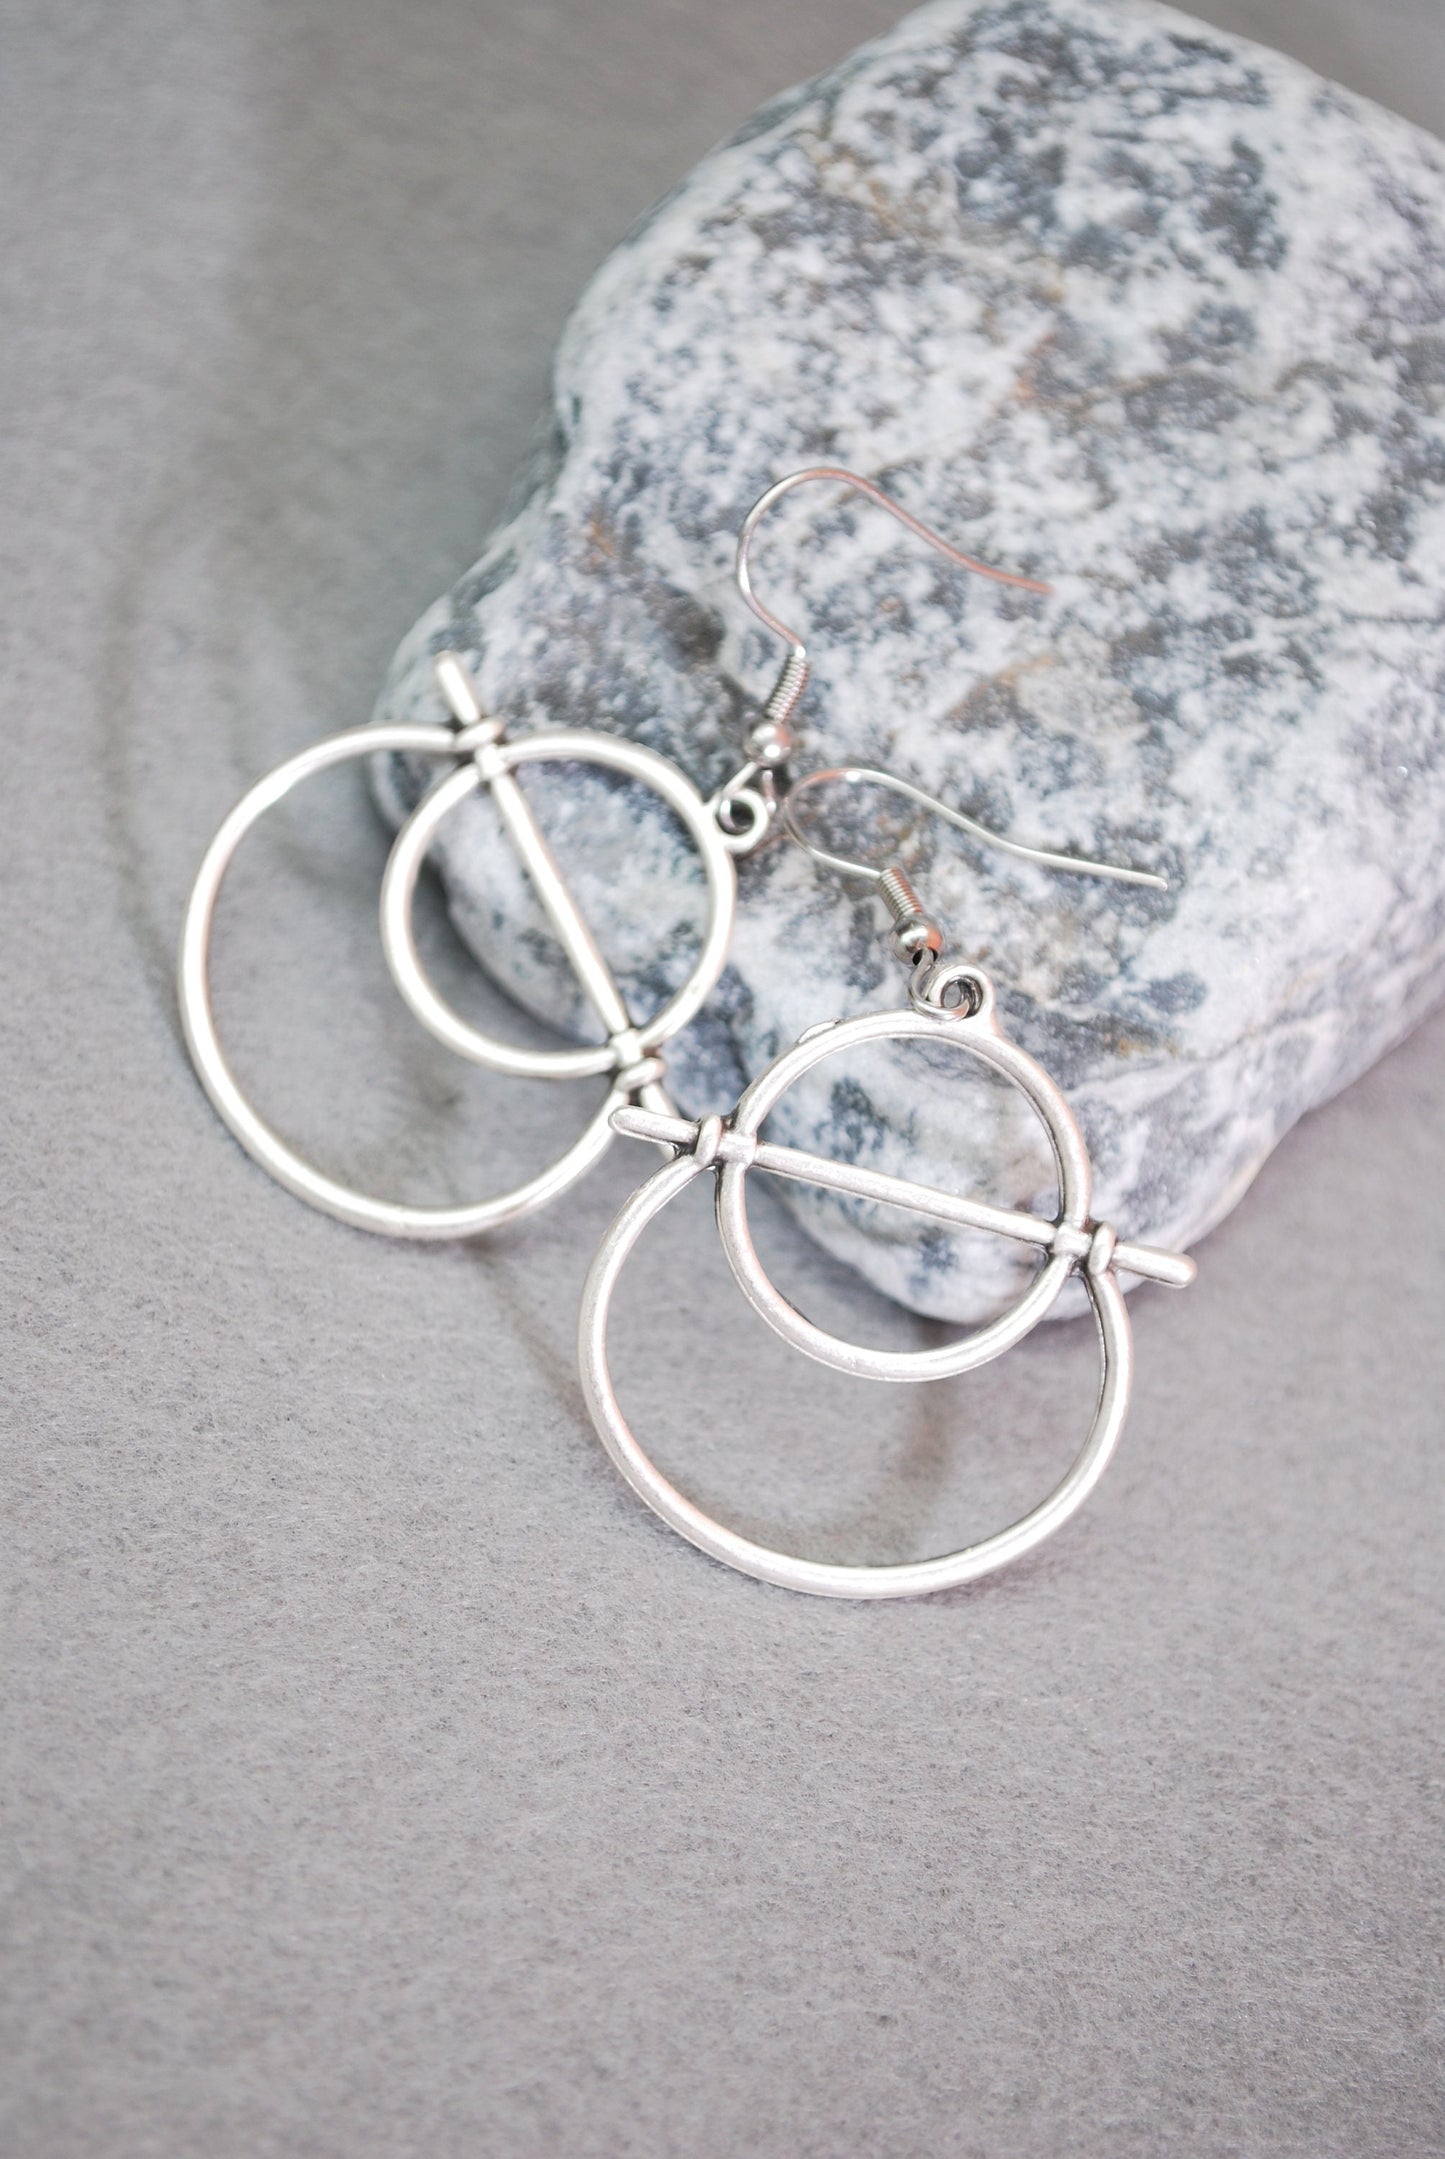 Abstract shape earrings, Silver plated geometric earrings, boho outfit, summer lightweight  5cm - 2"